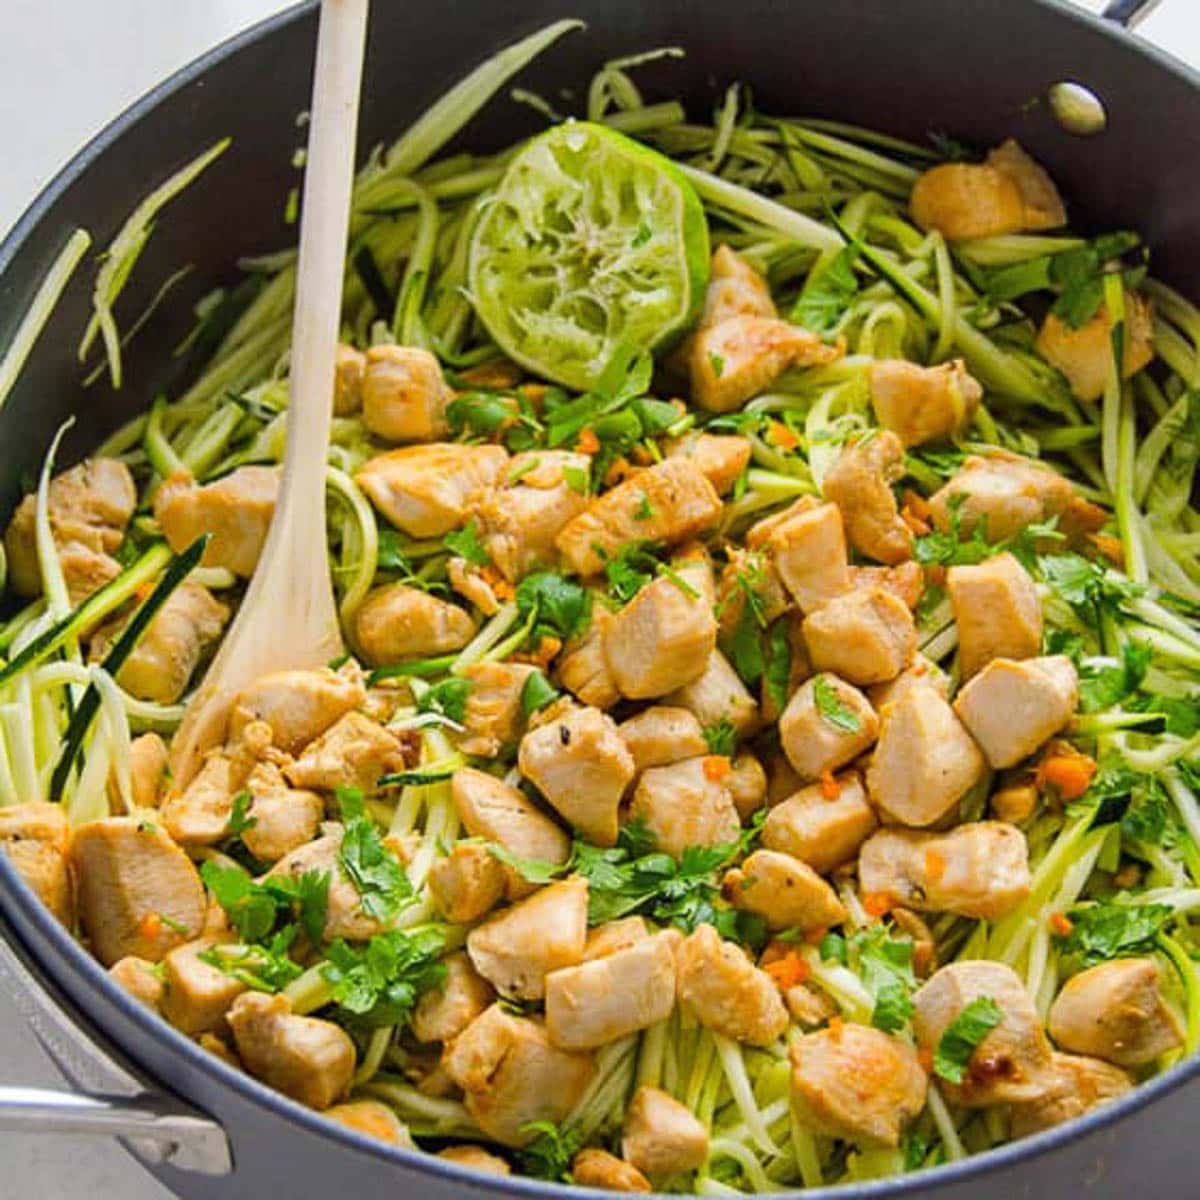 Zucchini noodles with cilantro and lime chicken in black skillet with wooden spoon.